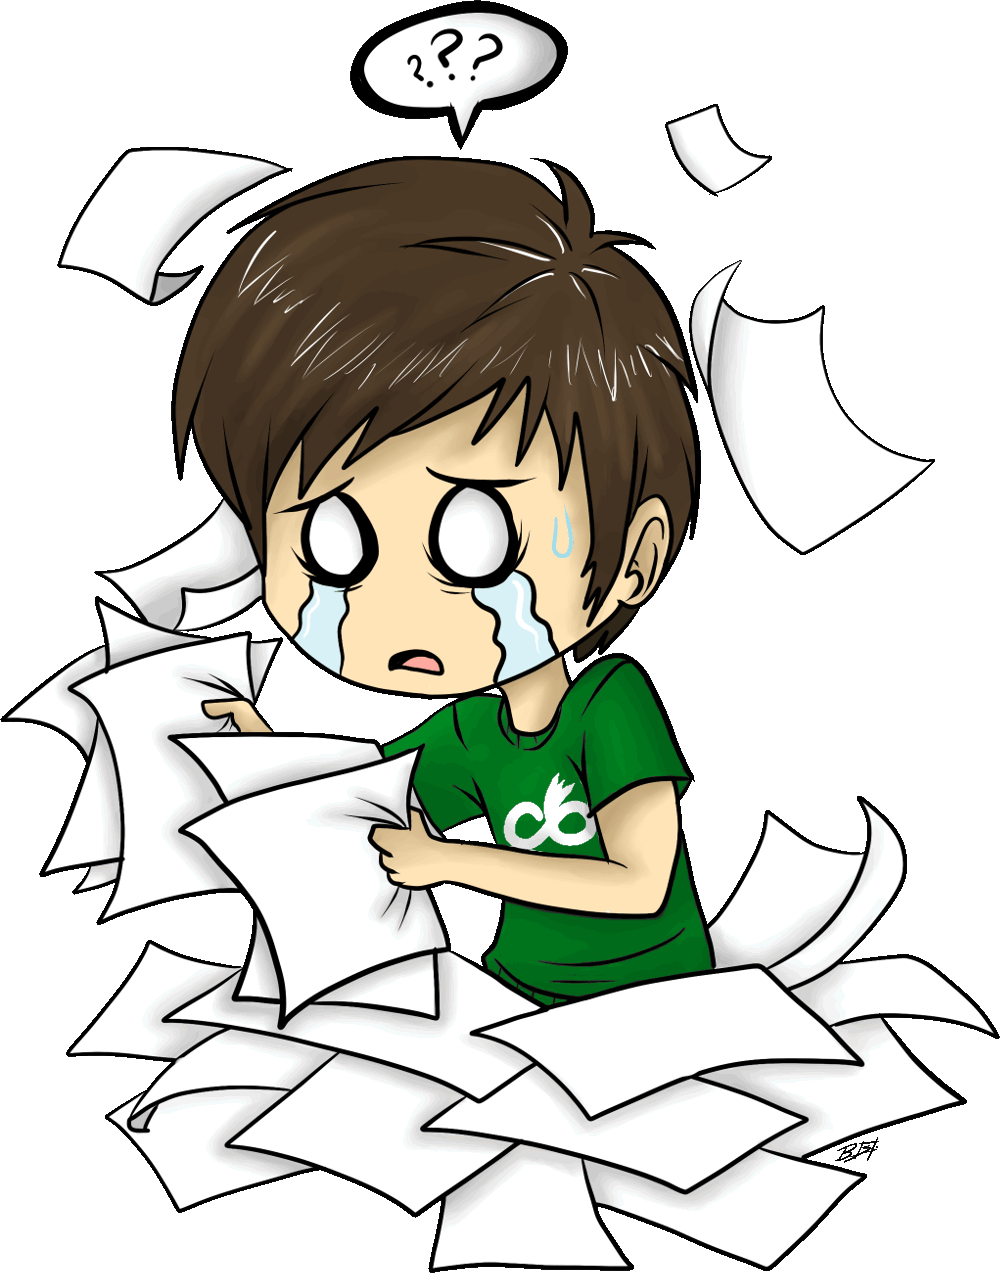 Illustration of a confused person standing in a pile of paper sheets